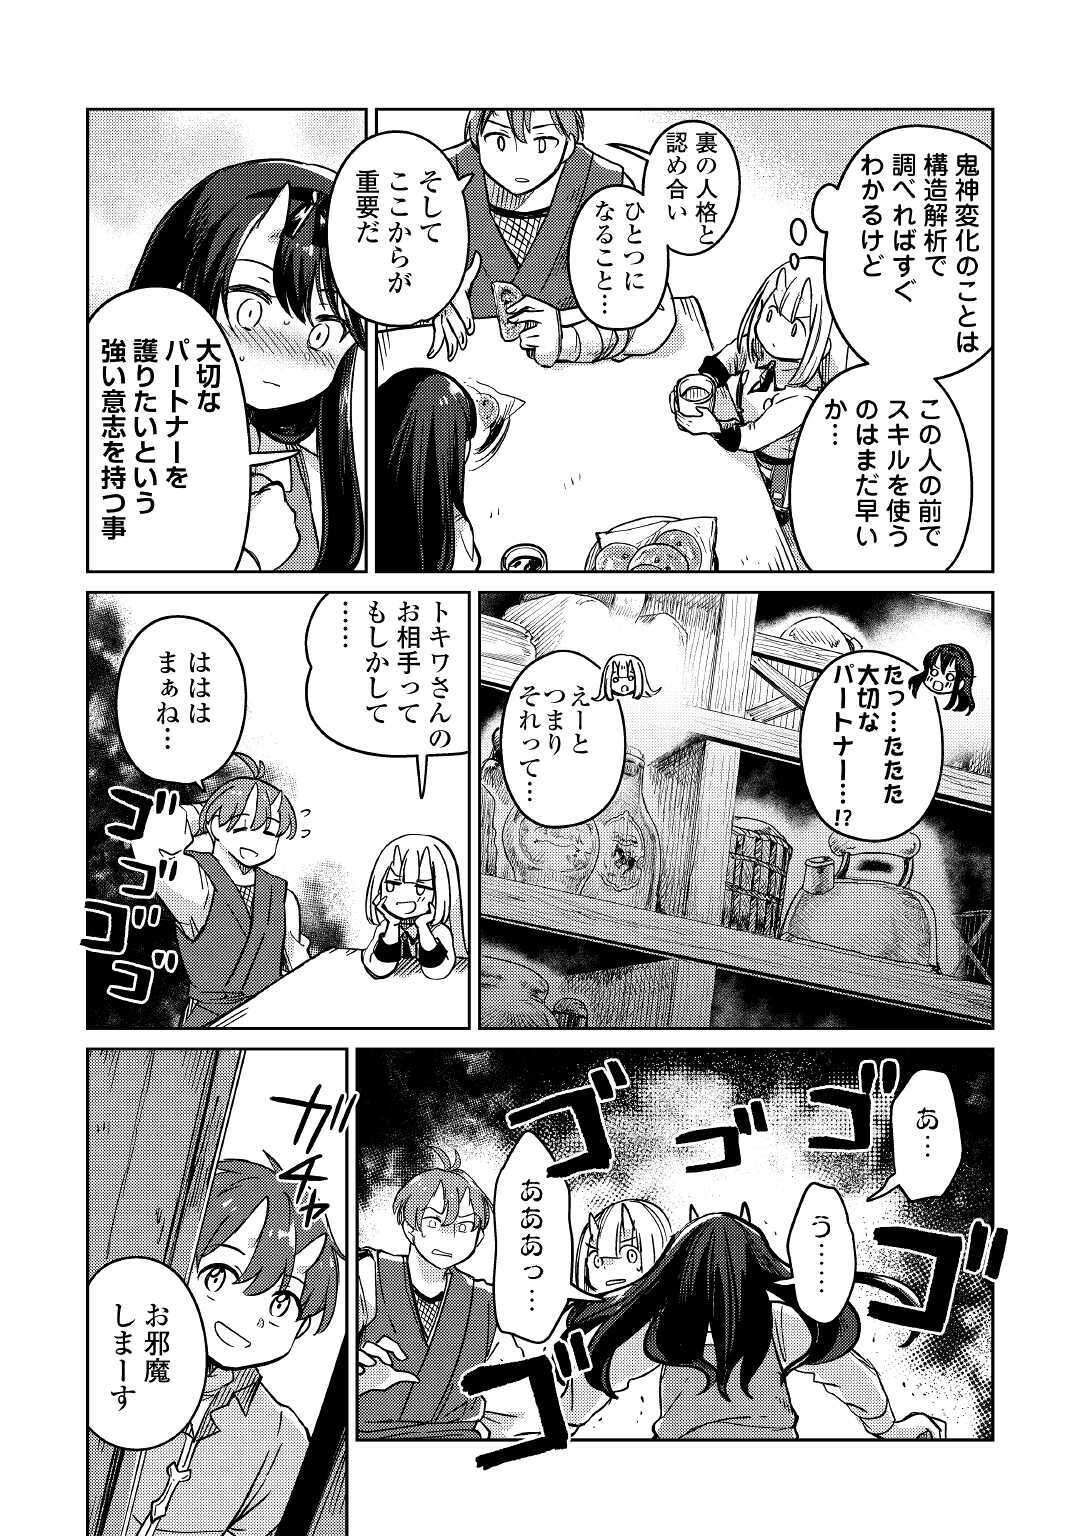 The Former Structural Researcher’s Story of Otherworldly Adventure 第31話 - Page 21